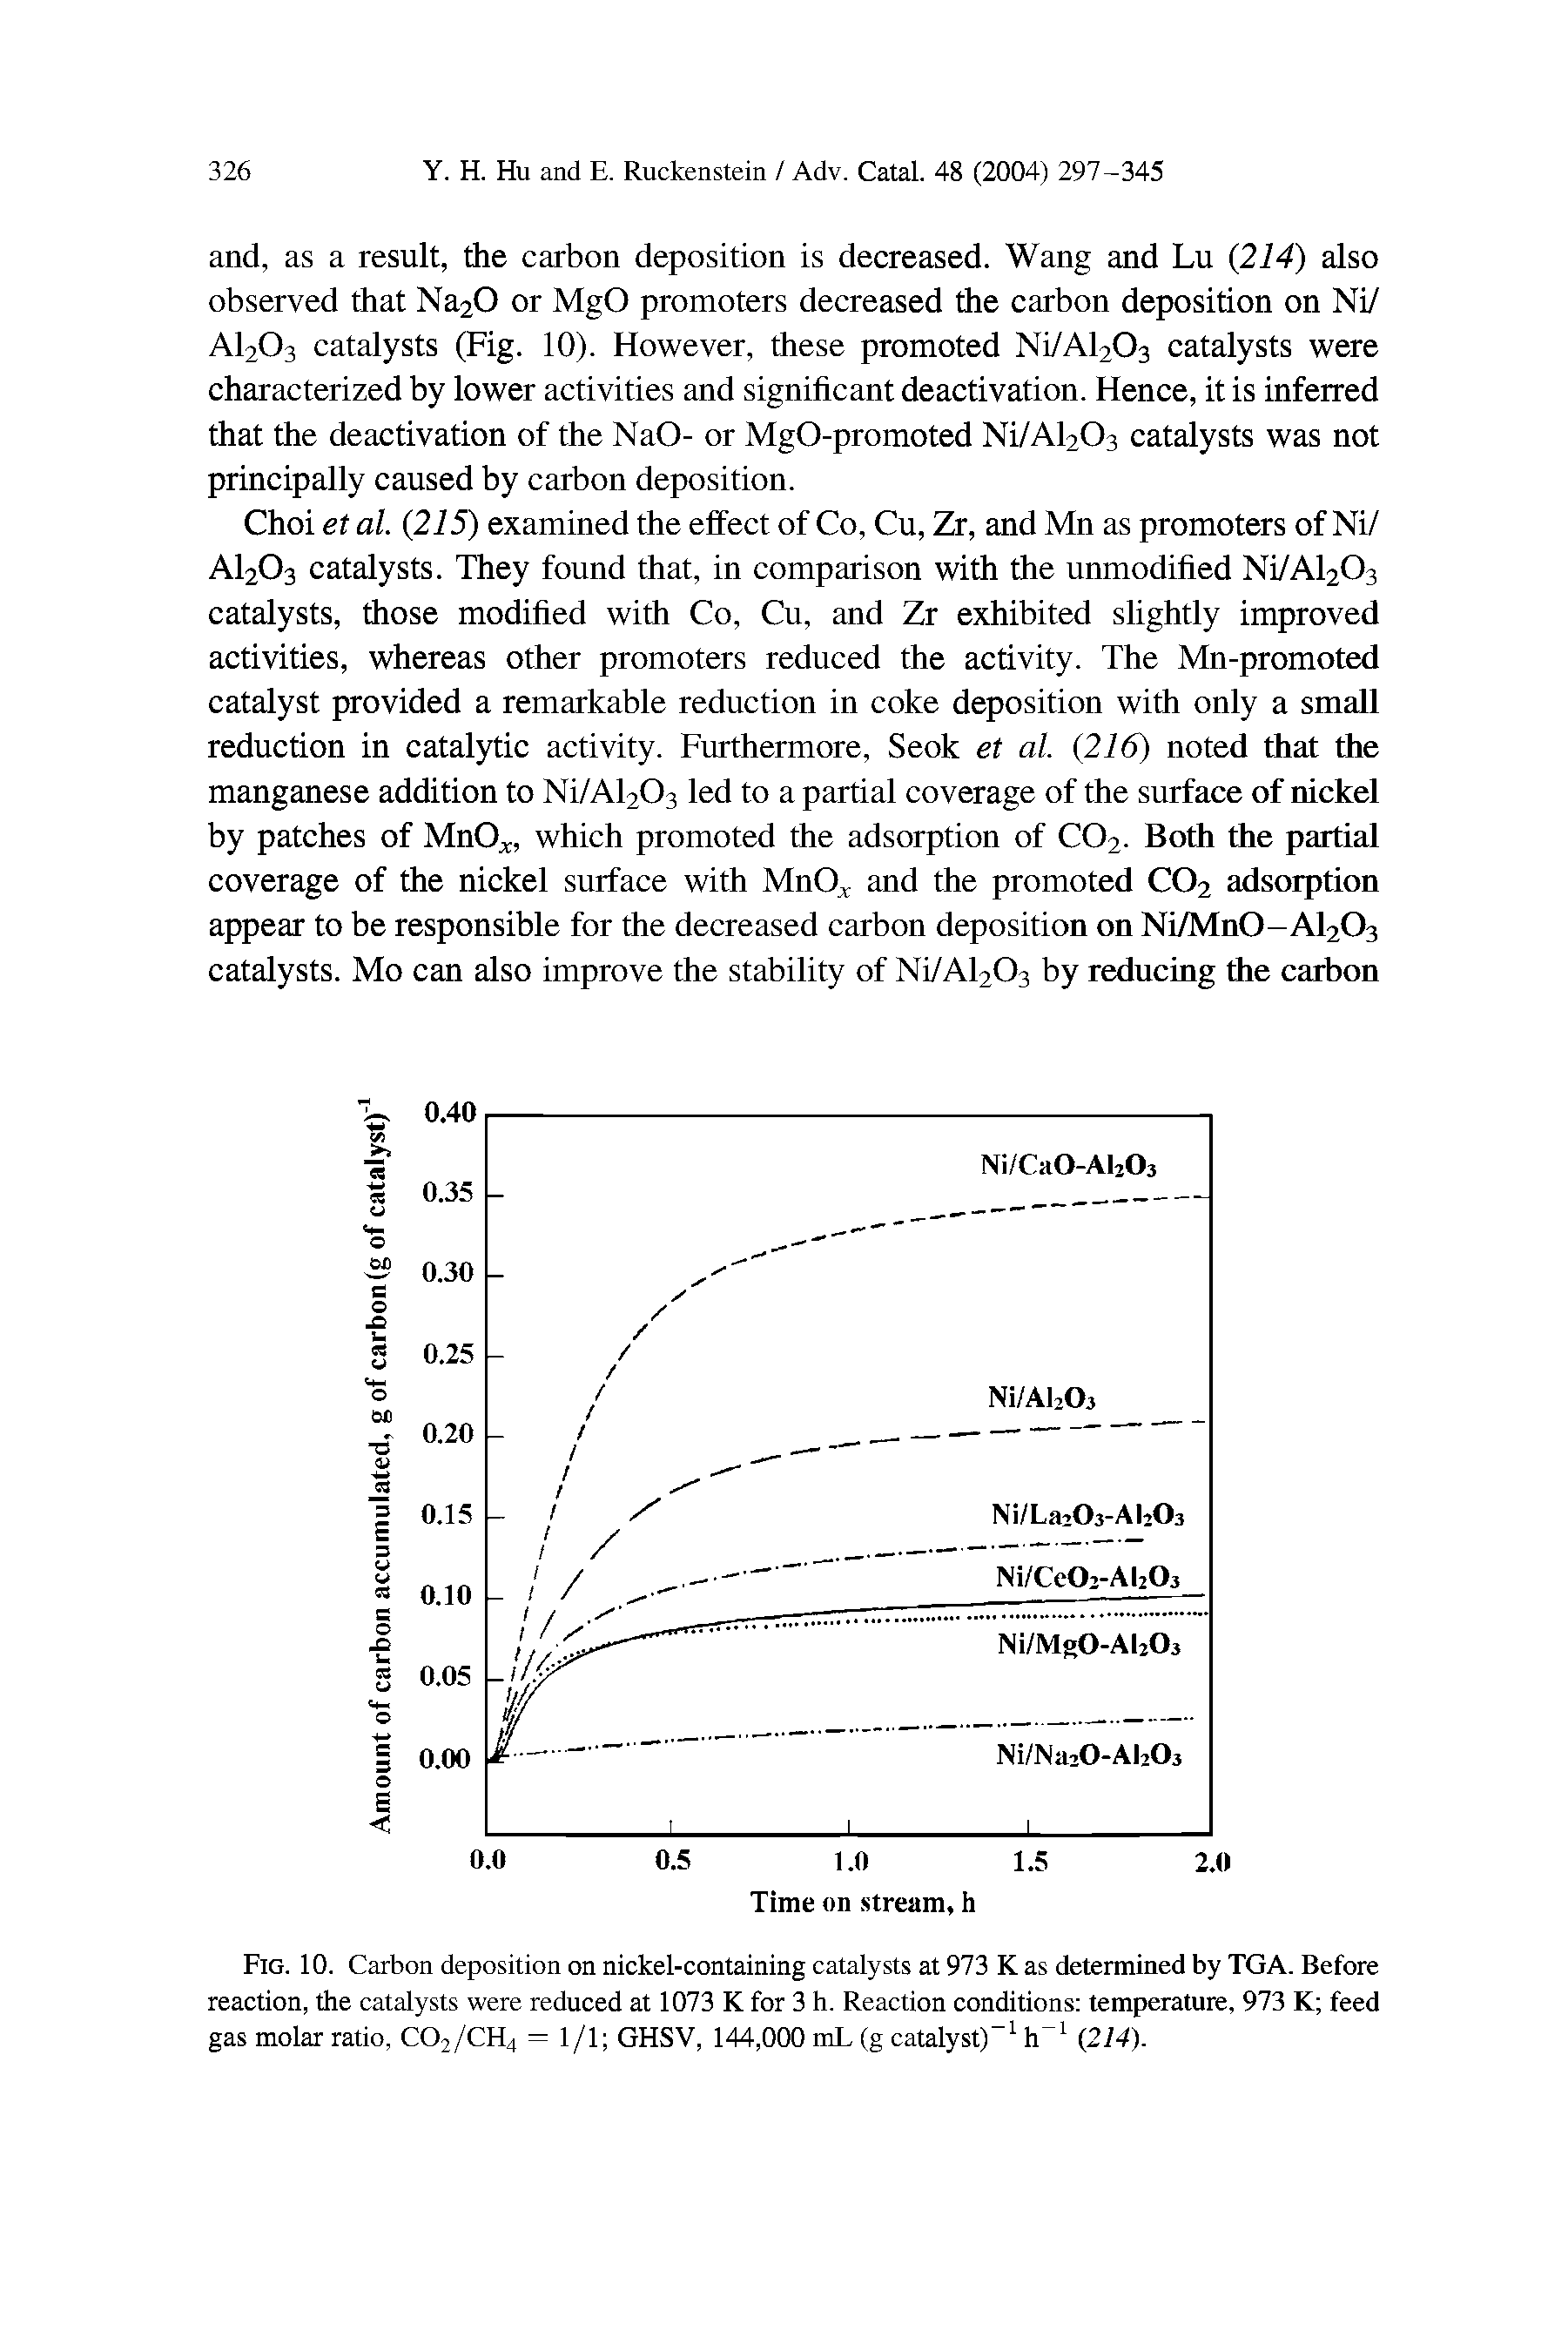 Fig. 10. Carbon deposition on nickel-containing catalysts at 973 K as determined by TGA. Before reaction, the catalysts were reduced at 1073 K for 3 h. Reaction conditions temperature, 973 K feed gas molar ratio, CO2/CH4 = 1/1 GHSV, 144,000 mL (g catalyst) h (214).